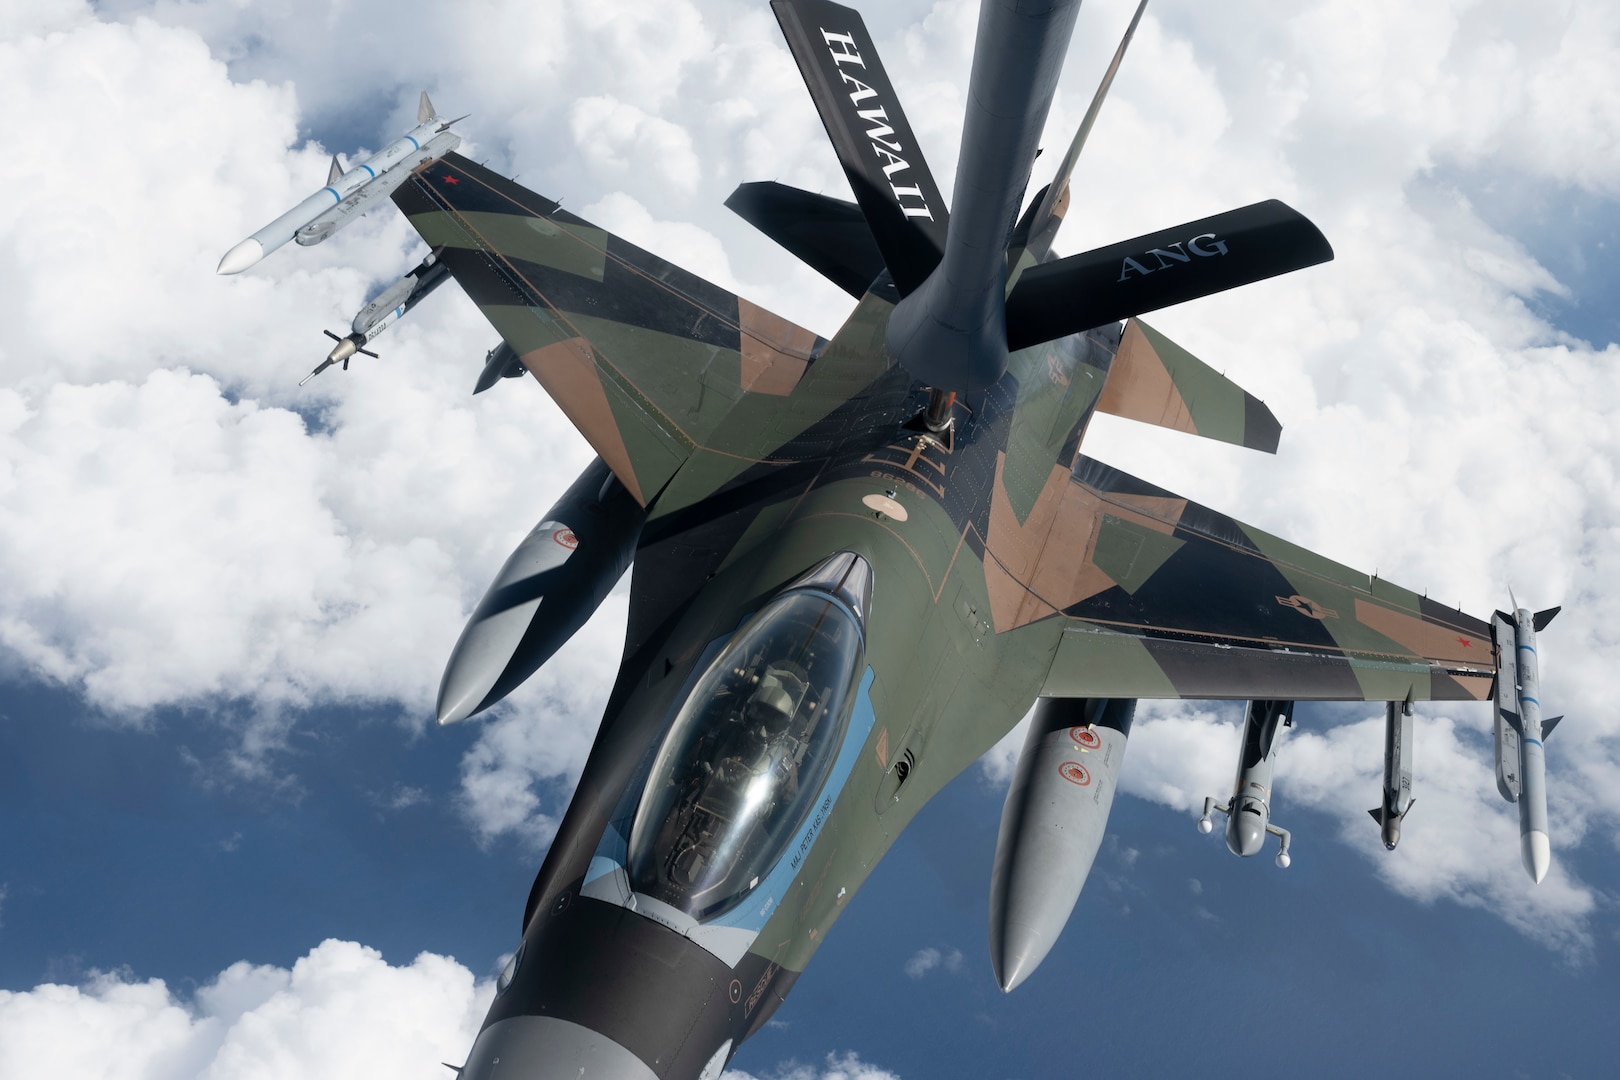 An F-16 Fighting Falcon from the 18th Aggressor Squadron receives fuel from a KC-135 Stratotanker from the 203rd Air Refueling Squadron March 10, 2021, near Oahu, Hawaii. The aircraft practiced combat tactics alongside fifth-generation F-22 Raptors from the 199th and 19th Fighter Squadrons for exercise Pacific Raptor. The Alaska-based F-16s, known as ‘Aggressors,’ simulate combat tactics.